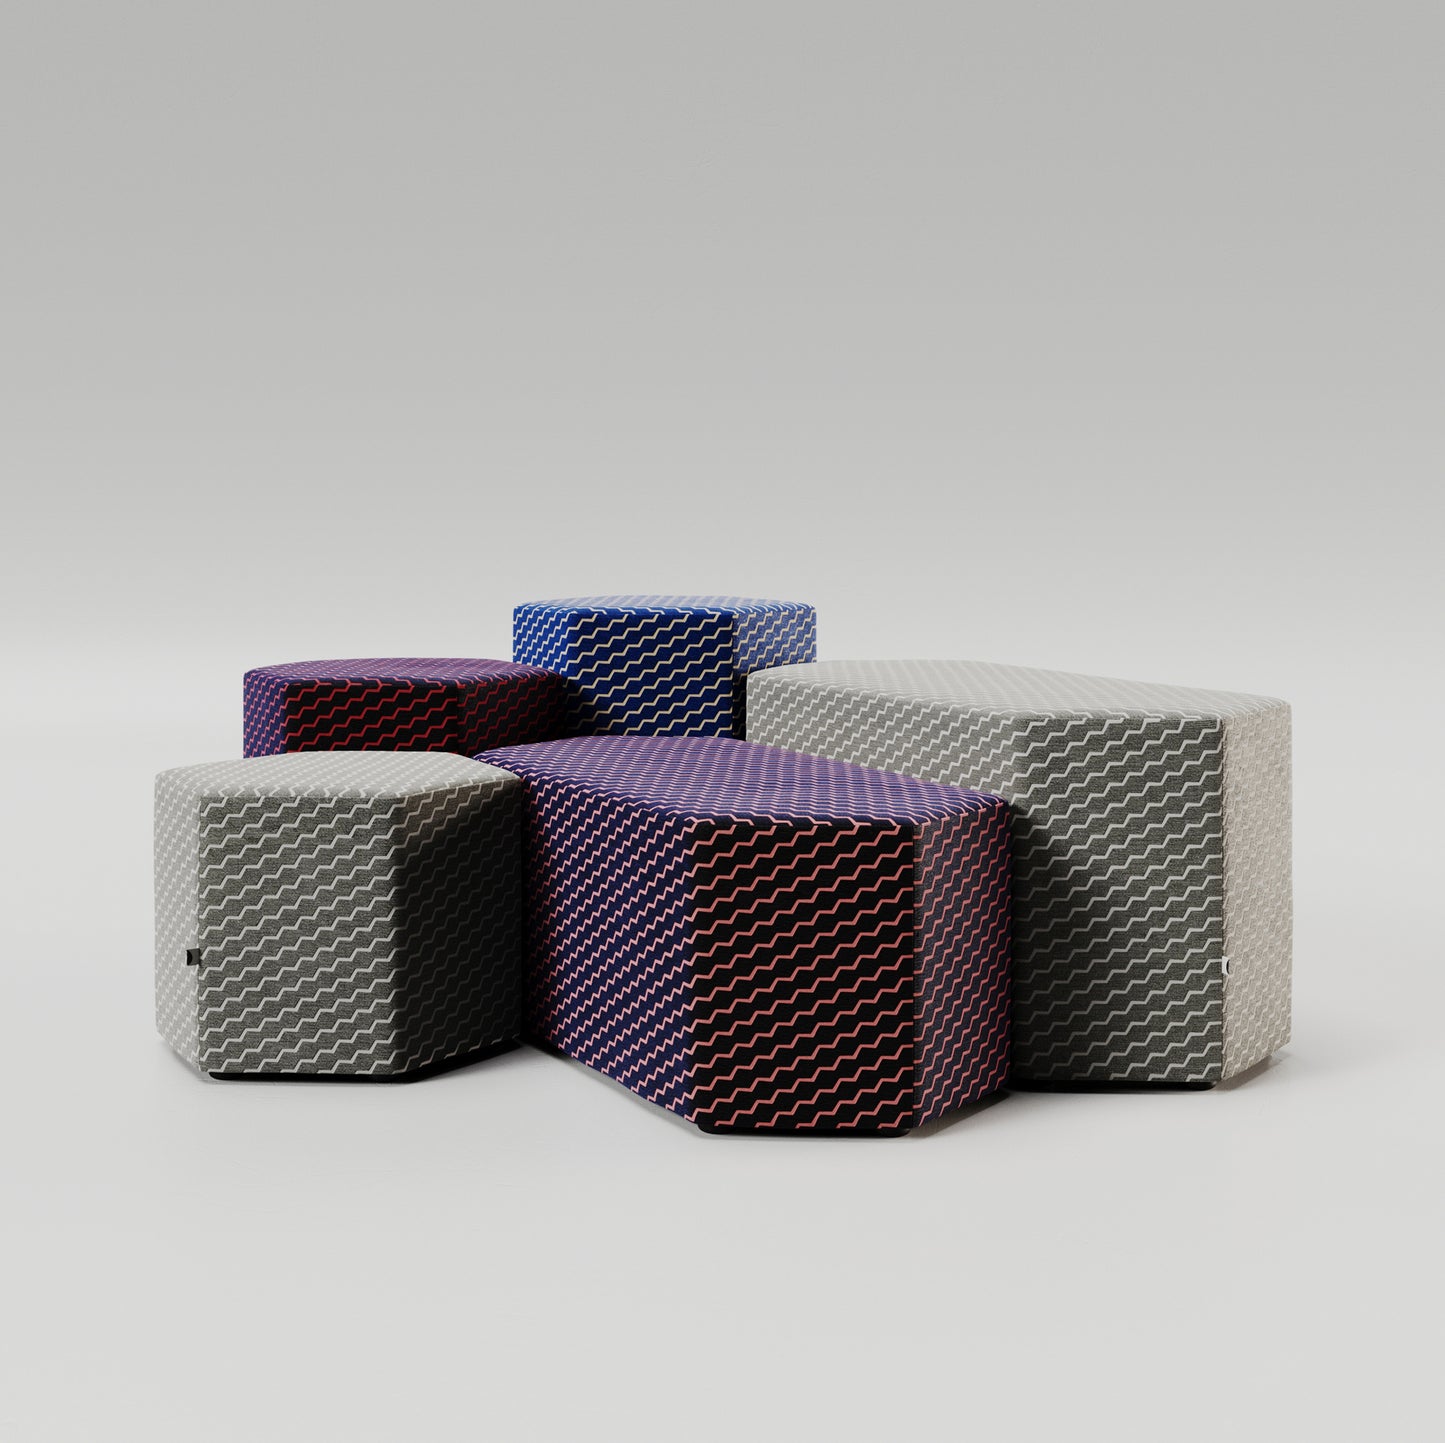 Buzz fabric with Hex stool by sixteen3